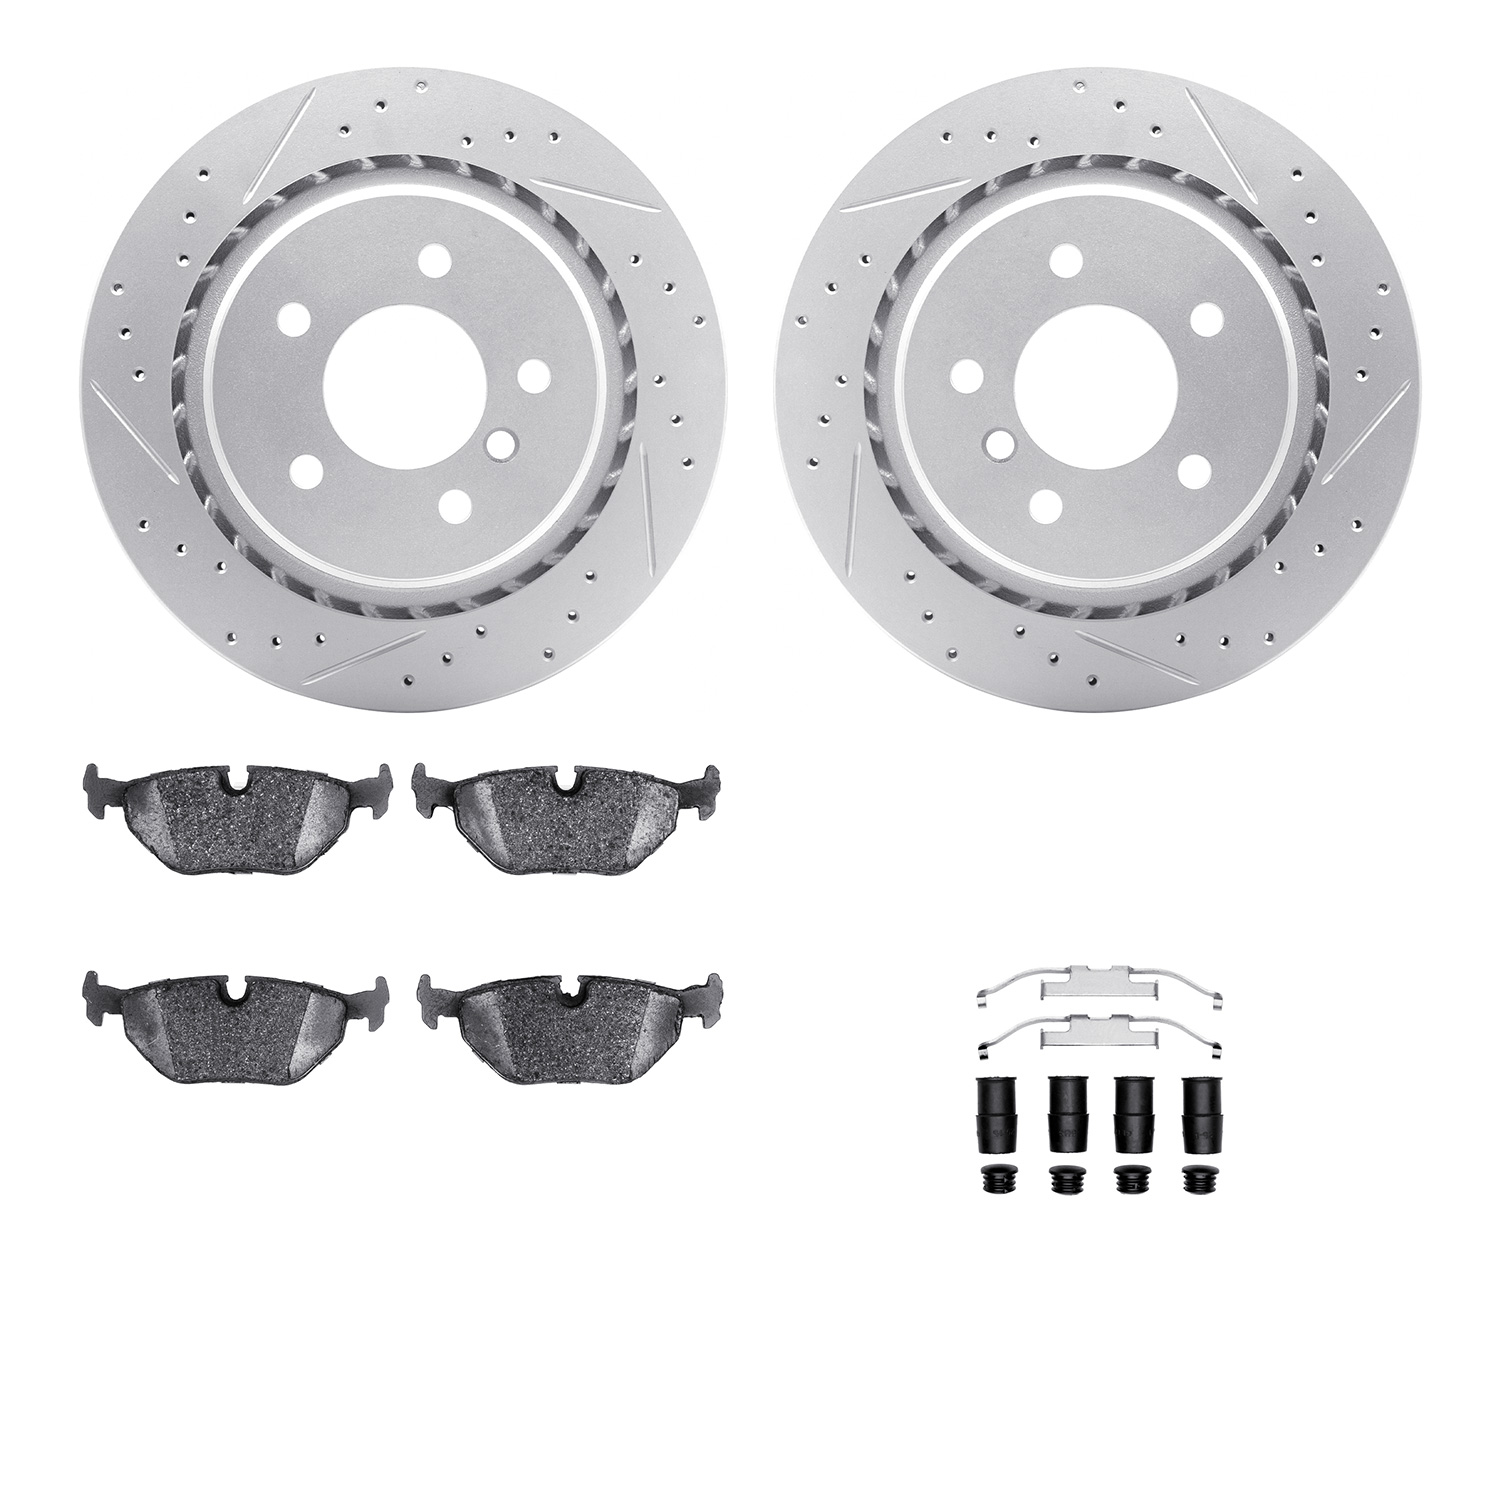 2512-31014 Geoperformance Drilled/Slotted Rotors w/5000 Advanced Brake Pads Kit & Hardware, 1995-2002 BMW, Position: Rear